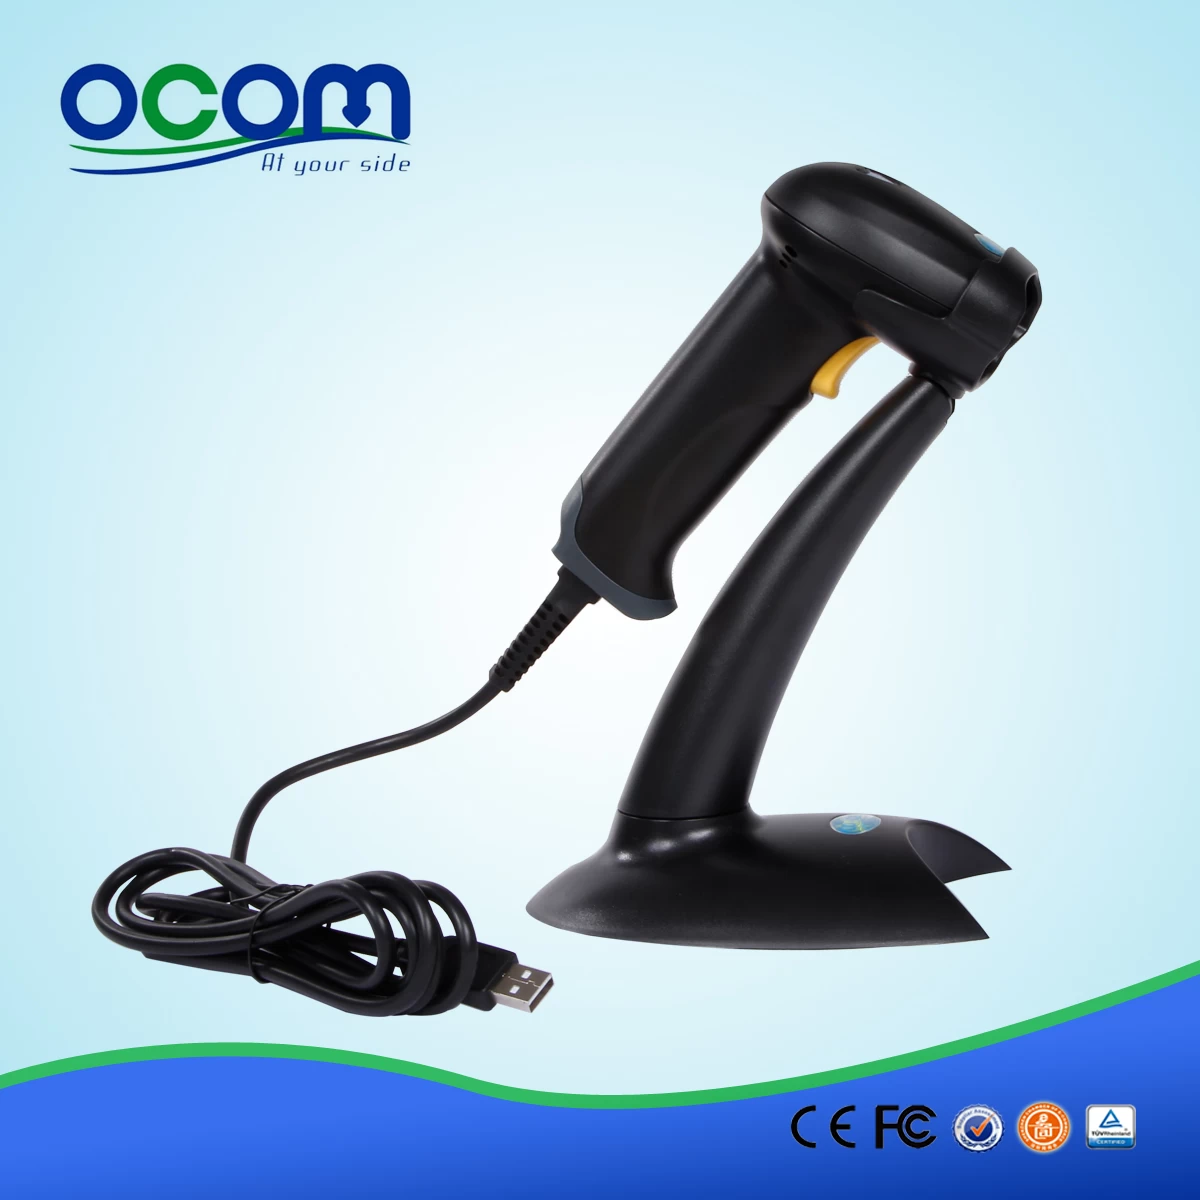 100scans / sec USB automatically scan laser barcode scanner